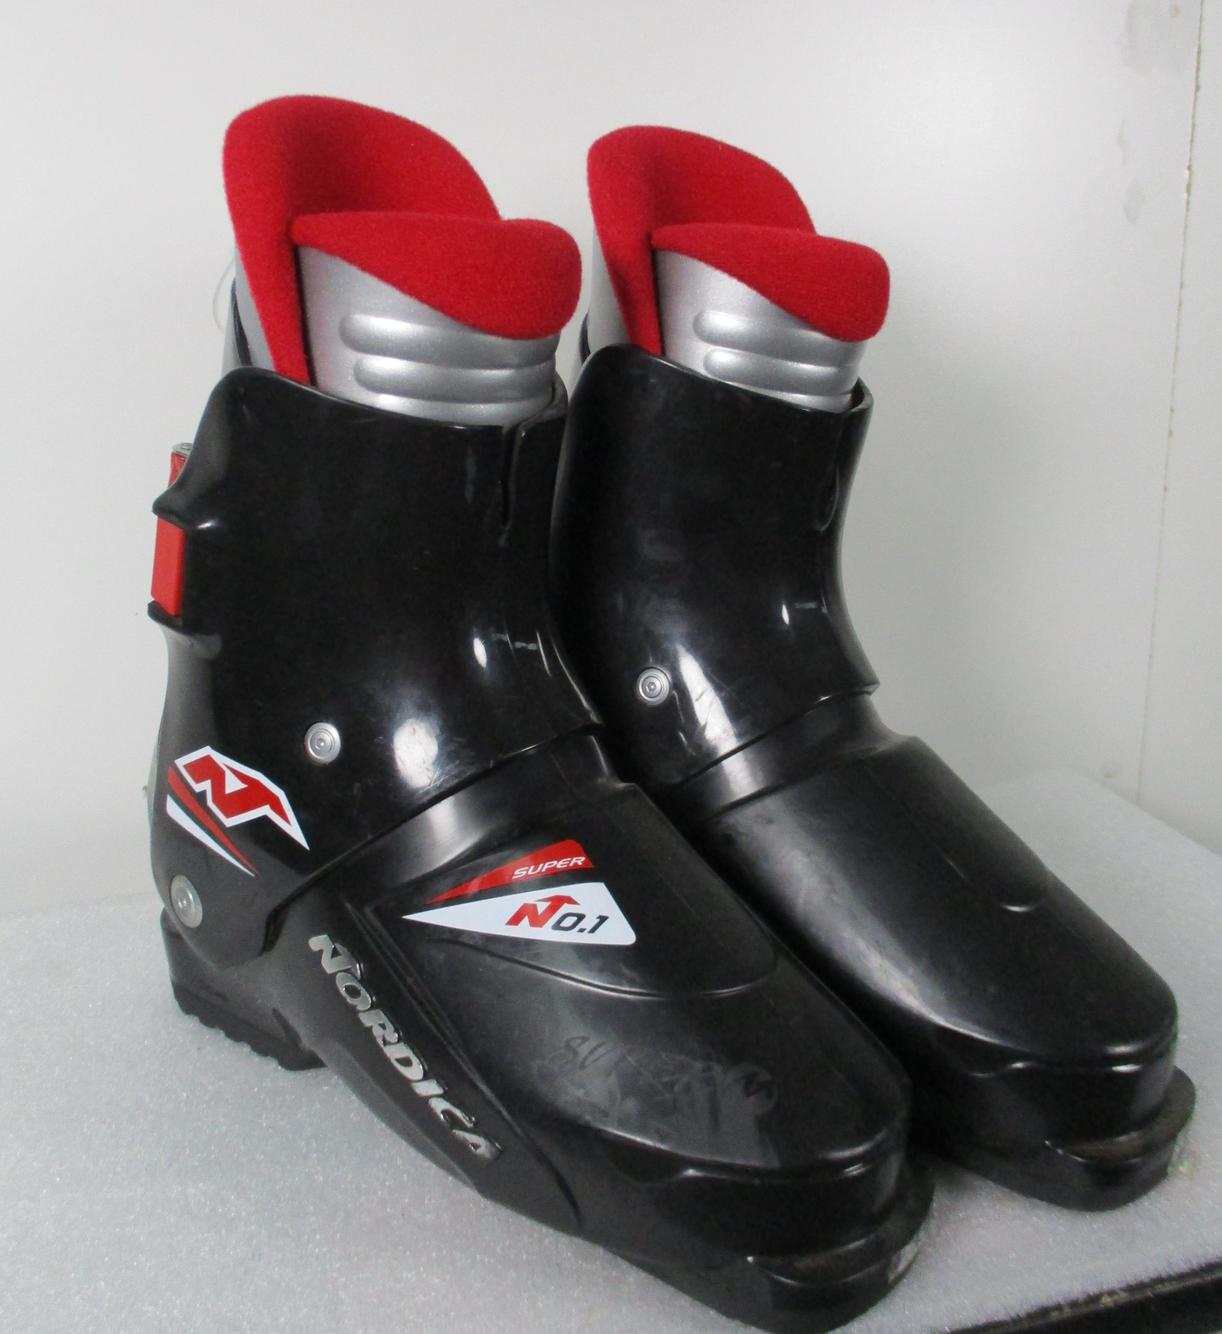 Used Nordica Super No.1 Rear Entry Ski Boots Size 25.5 (SY558 ...